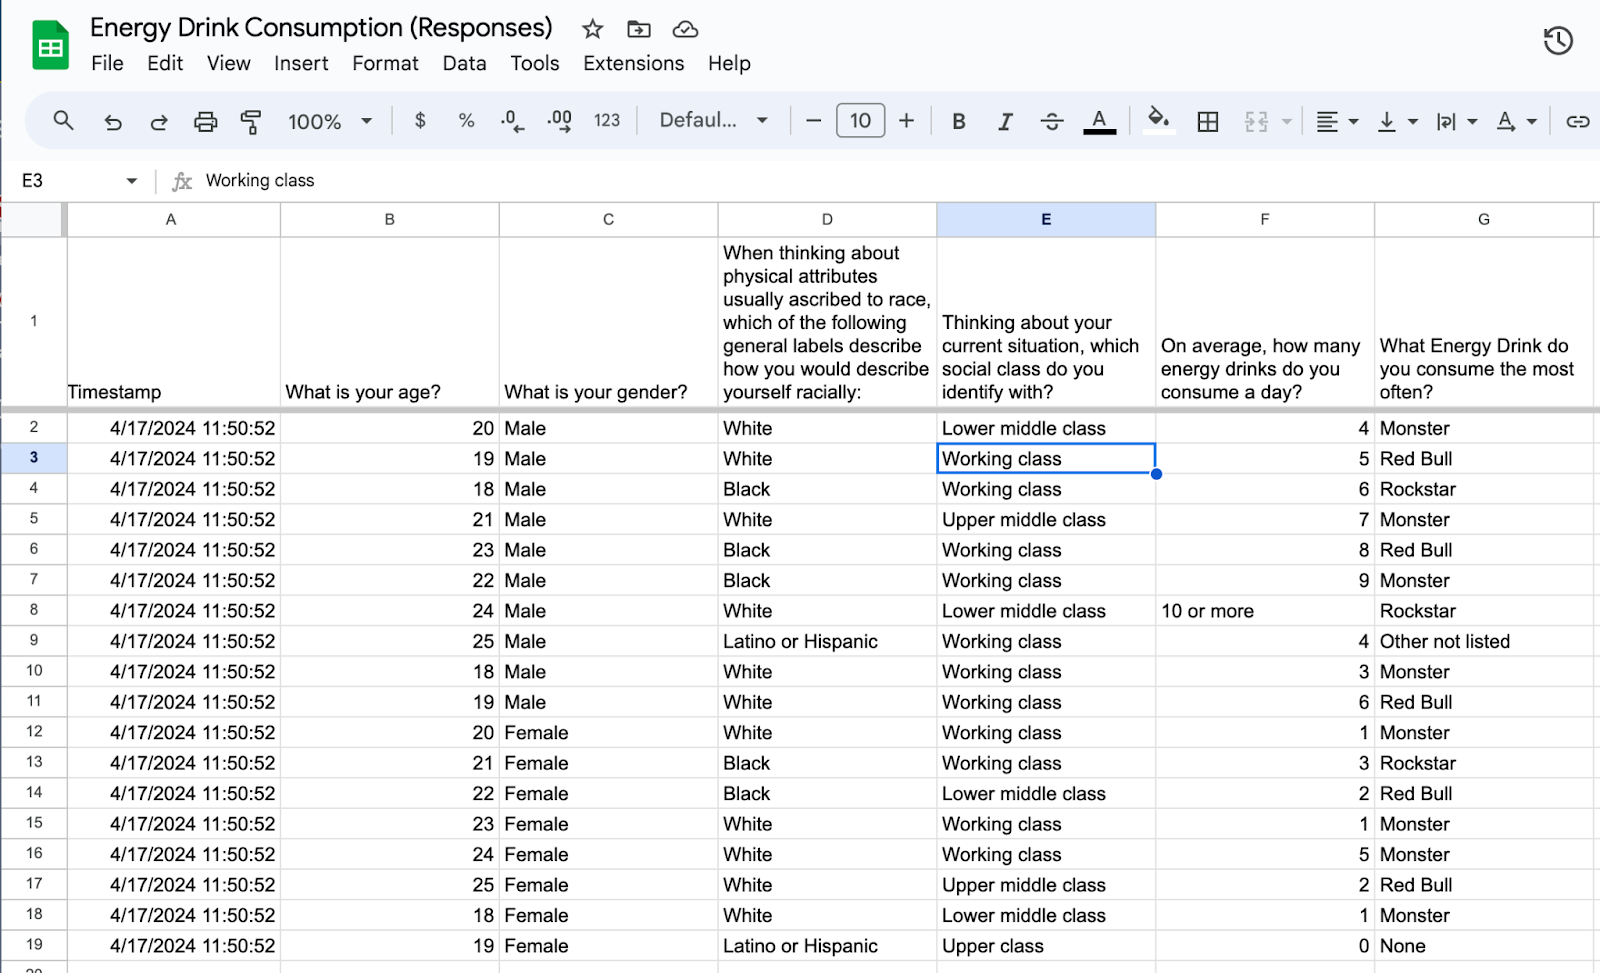 Example of a spreadsheet showing all the responses